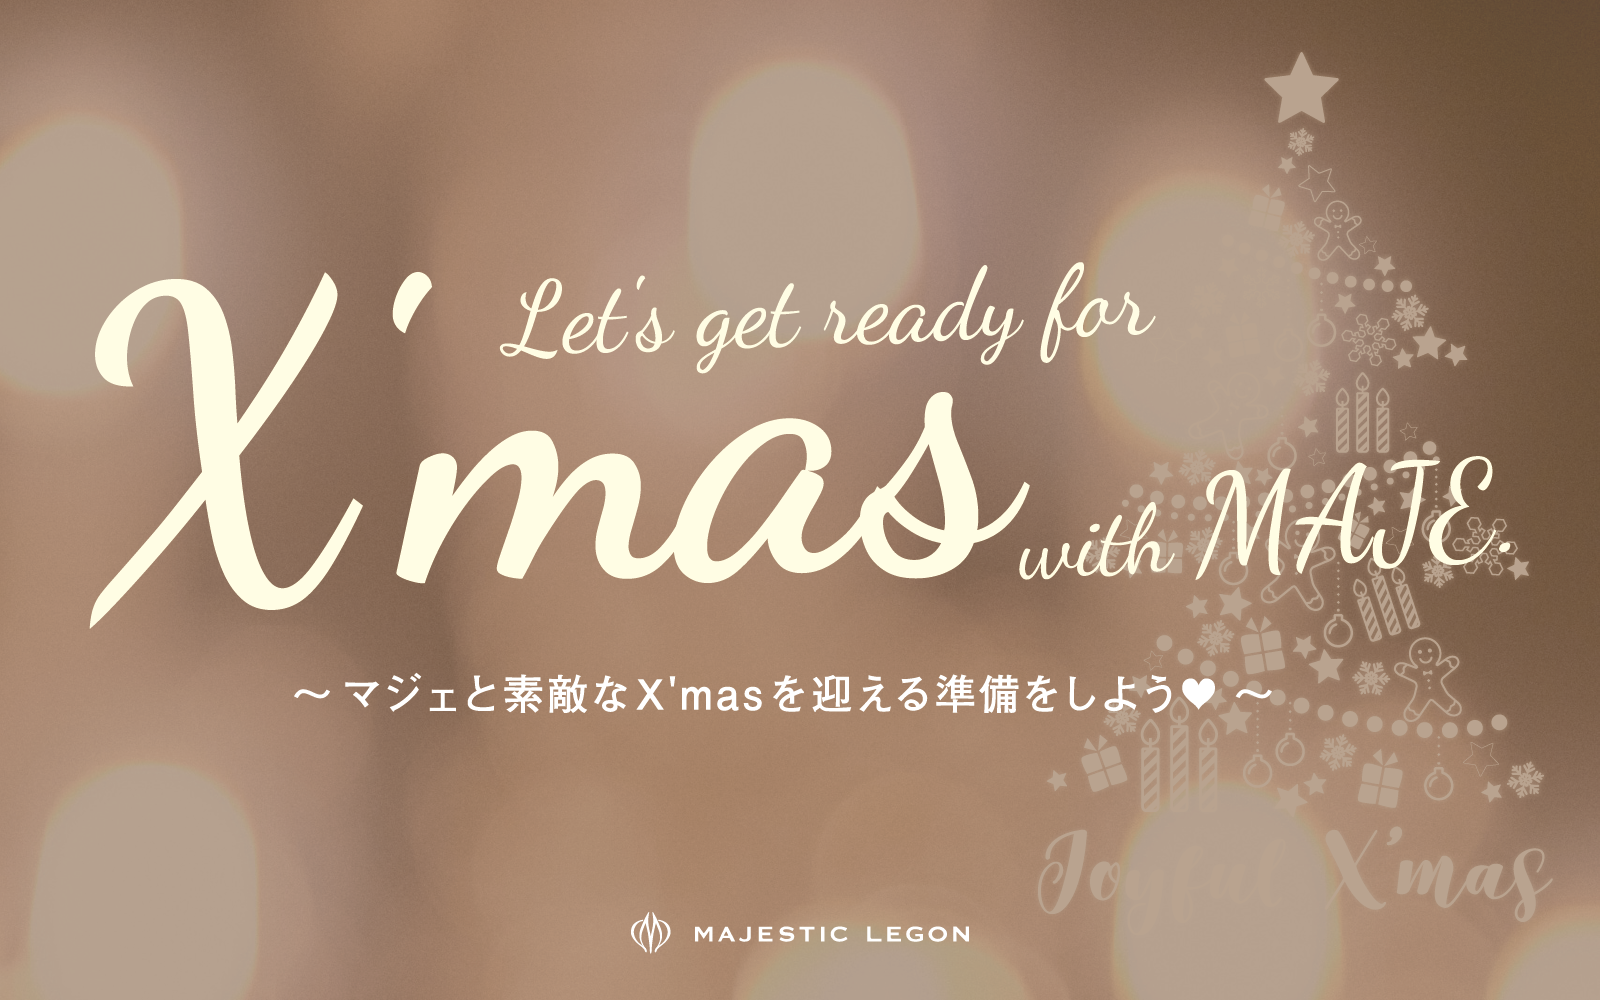 Let’s get ready for X’mas with MAJE♥